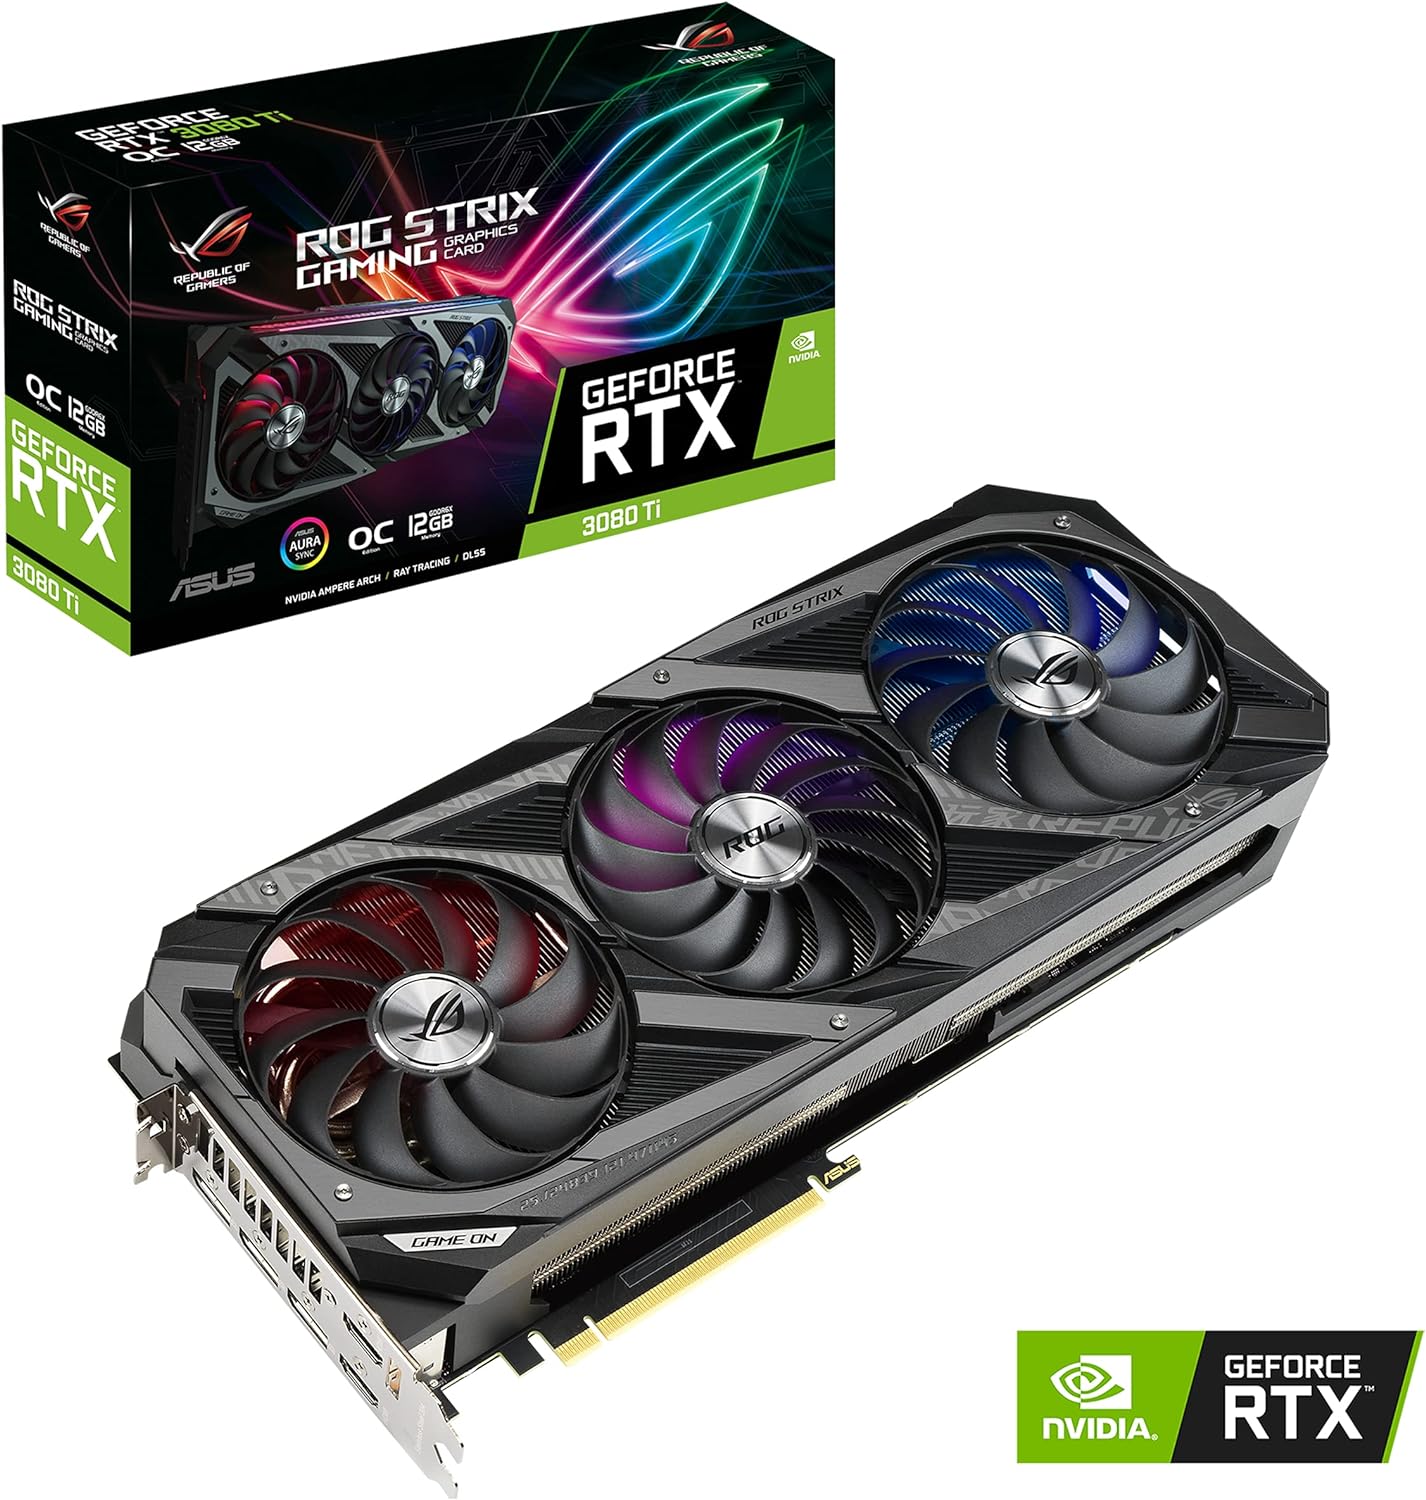 ASUS ROG Strix RTX 3080 Ti OC Gaming Card: Next-gen Ampere architecture for 2X FP32 throughput and power efficiency. 0195553169776